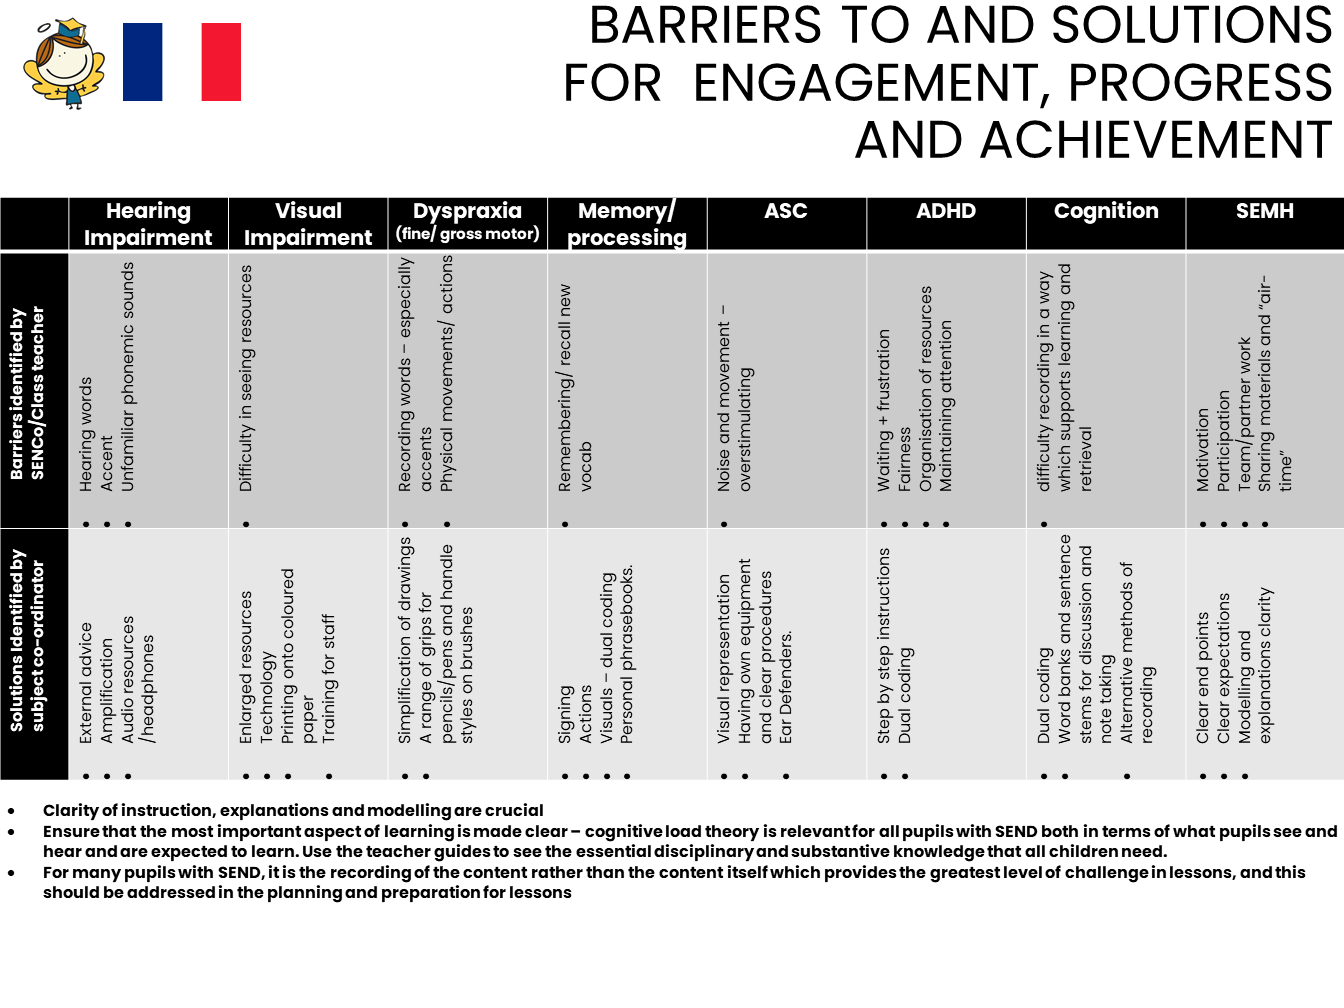 Barriers and Solutions